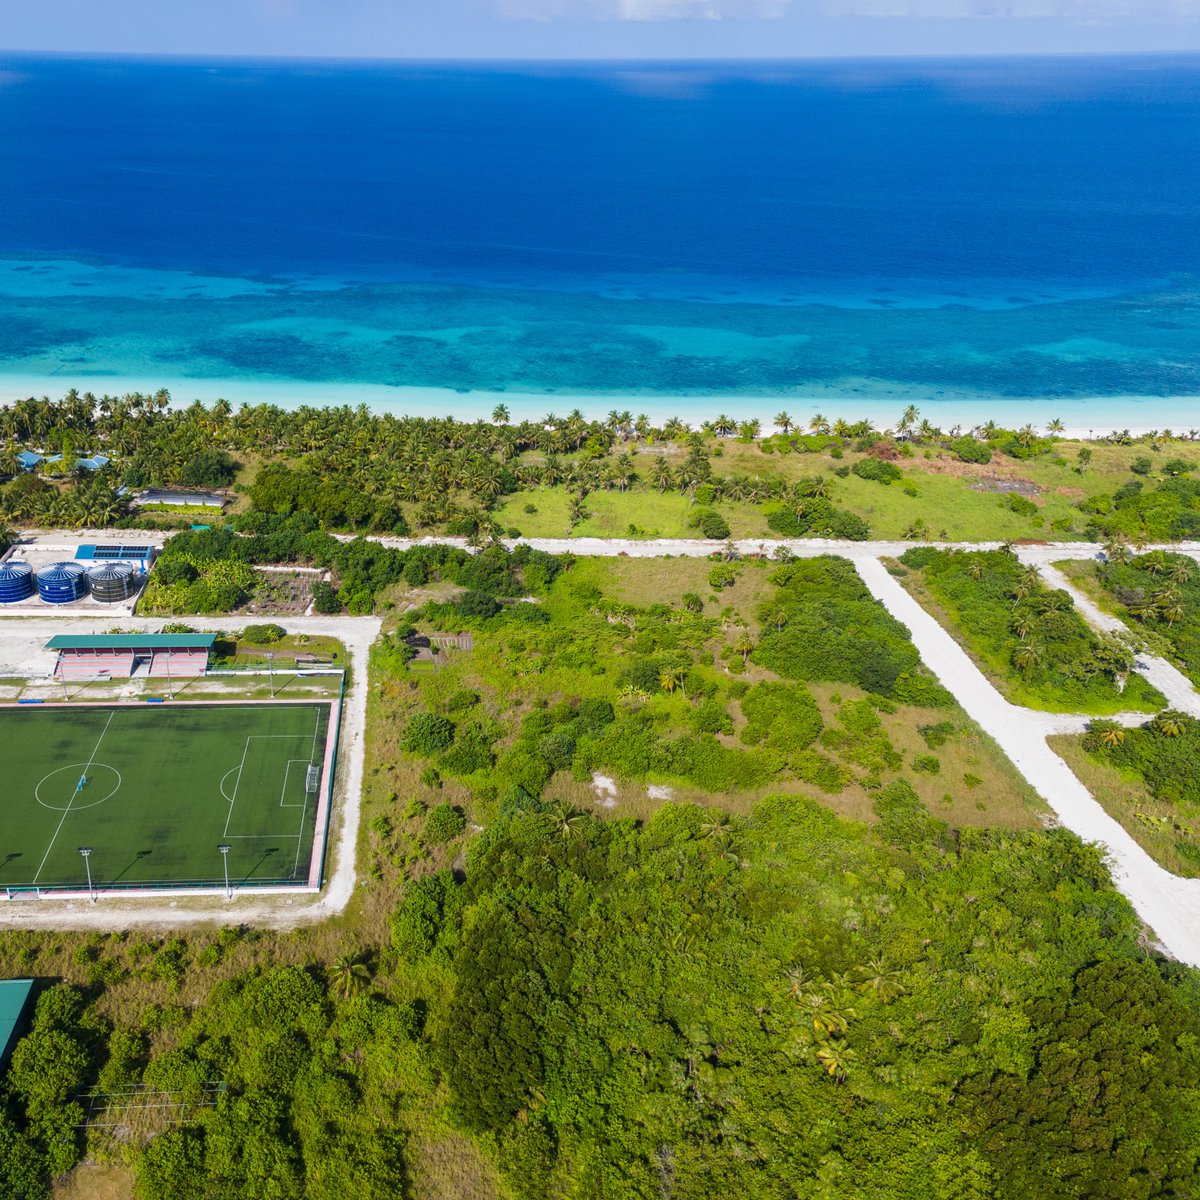 Discover the verdant beauty of Laamu Atoll, where emerald jungles meet turquoise waters, painting a picture-perfect paradise. 🌿

#islandrooms #staylocal #maldivesgetaways #visitmaldives